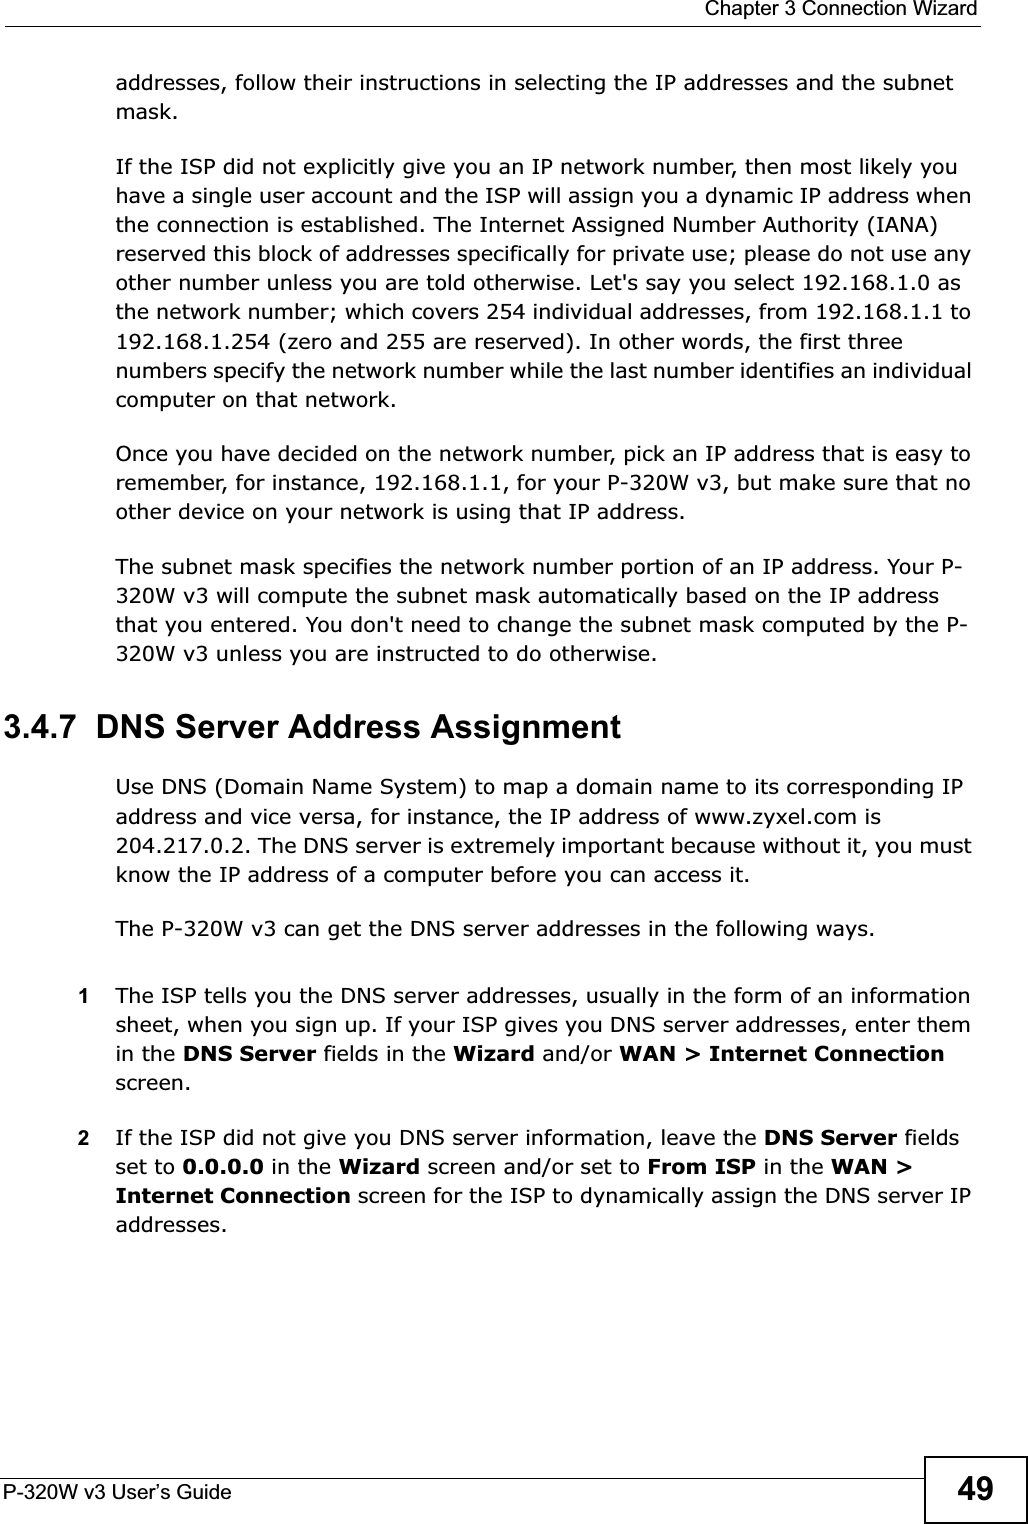  Chapter 3 Connection WizardP-320W v3 User’s Guide 49addresses, follow their instructions in selecting the IP addresses and the subnet mask.If the ISP did not explicitly give you an IP network number, then most likely you have a single user account and the ISP will assign you a dynamic IP address when the connection is established. The Internet Assigned Number Authority (IANA) reserved this block of addresses specifically for private use; please do not use any other number unless you are told otherwise. Let&apos;s say you select 192.168.1.0 as the network number; which covers 254 individual addresses, from 192.168.1.1 to 192.168.1.254 (zero and 255 are reserved). In other words, the first three numbers specify the network number while the last number identifies an individual computer on that network.Once you have decided on the network number, pick an IP address that is easy to remember, for instance, 192.168.1.1, for your P-320W v3, but make sure that no other device on your network is using that IP address.The subnet mask specifies the network number portion of an IP address. Your P-320W v3 will compute the subnet mask automatically based on the IP address that you entered. You don&apos;t need to change the subnet mask computed by the P-320W v3 unless you are instructed to do otherwise.3.4.7  DNS Server Address AssignmentUse DNS (Domain Name System) to map a domain name to its corresponding IP address and vice versa, for instance, the IP address of www.zyxel.com is 204.217.0.2. The DNS server is extremely important because without it, you must know the IP address of a computer before you can access it. The P-320W v3 can get the DNS server addresses in the following ways.1The ISP tells you the DNS server addresses, usually in the form of an information sheet, when you sign up. If your ISP gives you DNS server addresses, enter them in the DNS Server fields in the Wizard and/or WAN &gt; Internet Connectionscreen.2If the ISP did not give you DNS server information, leave the DNS Server fields set to 0.0.0.0 in the Wizard screen and/or set to From ISP in the WAN &gt;Internet Connection screen for the ISP to dynamically assign the DNS server IP addresses.